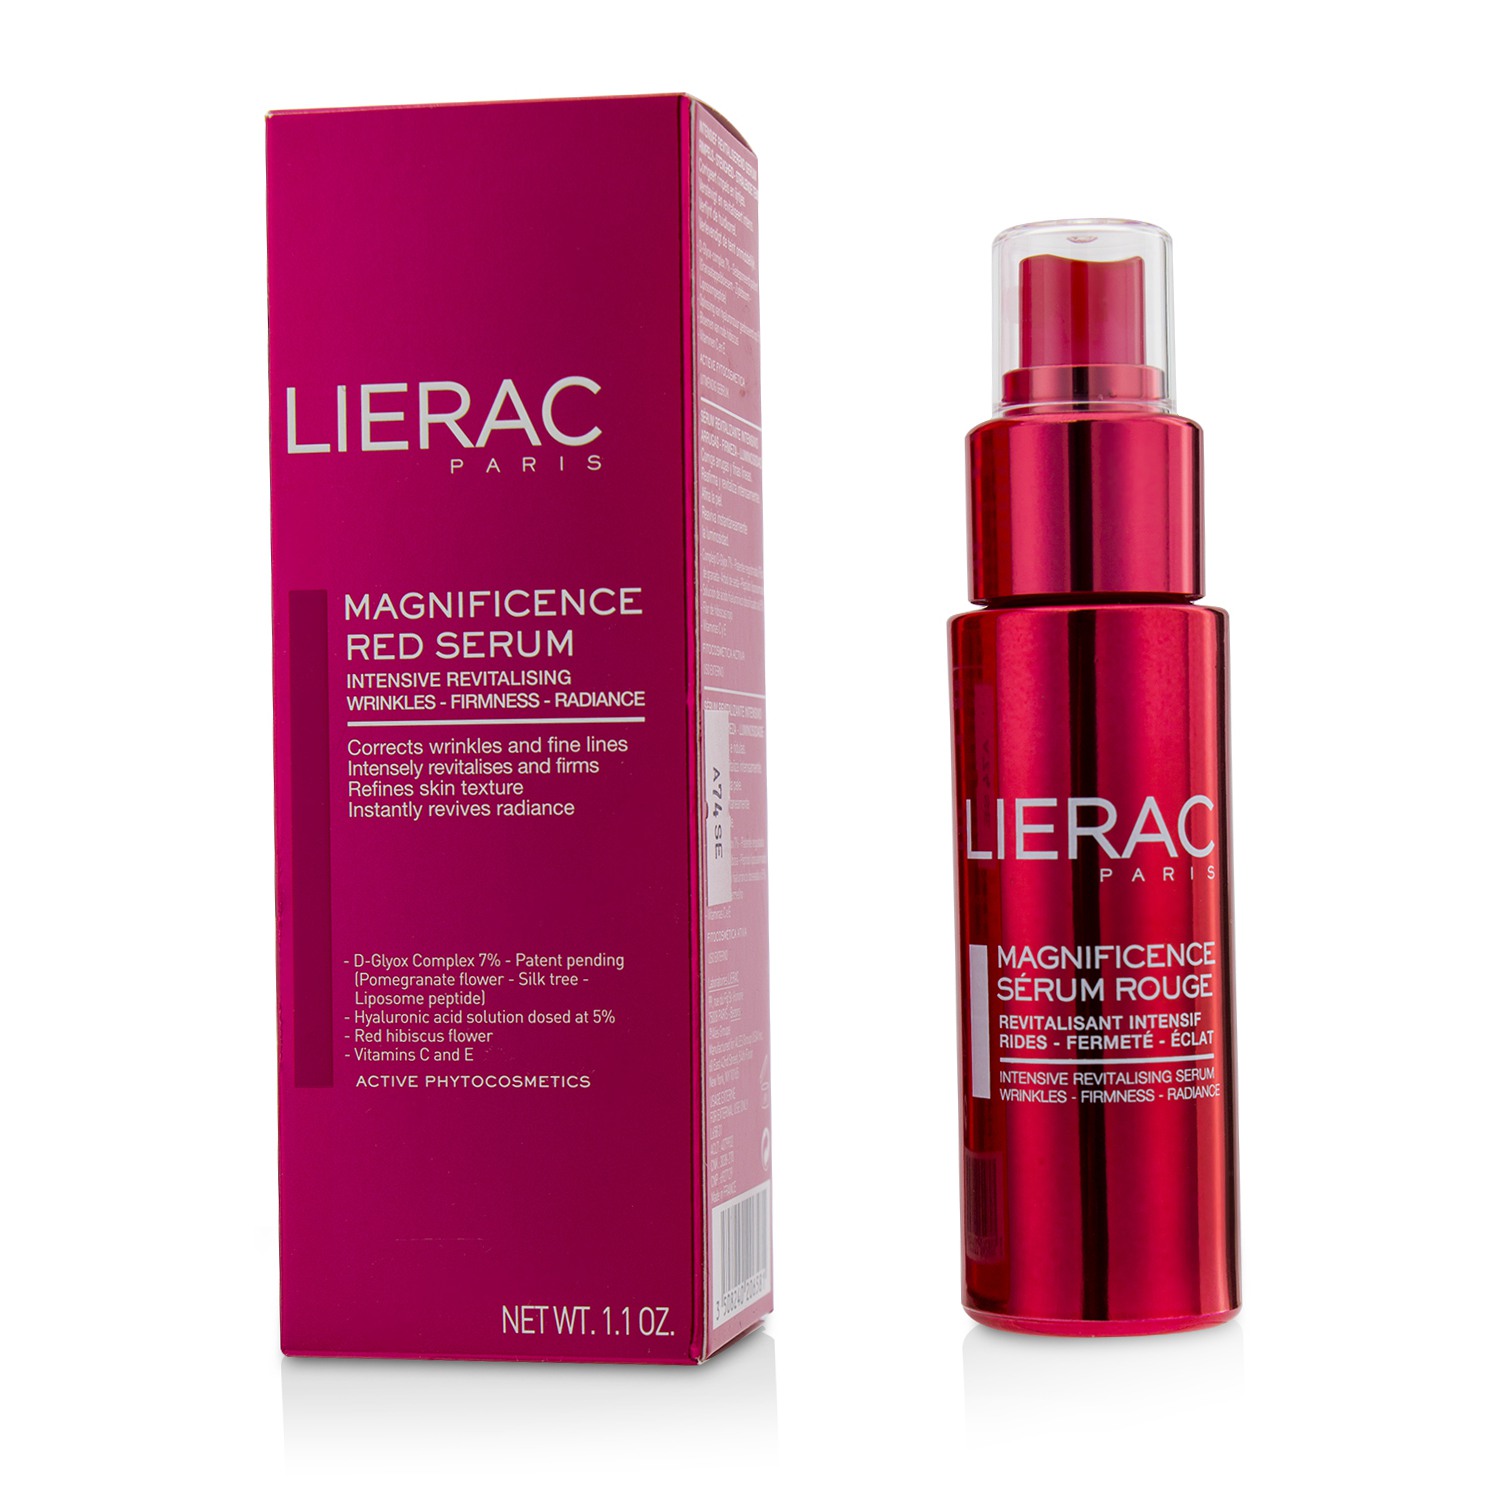 Magnificence Intensive Revitalising Red Serum Lierac Image